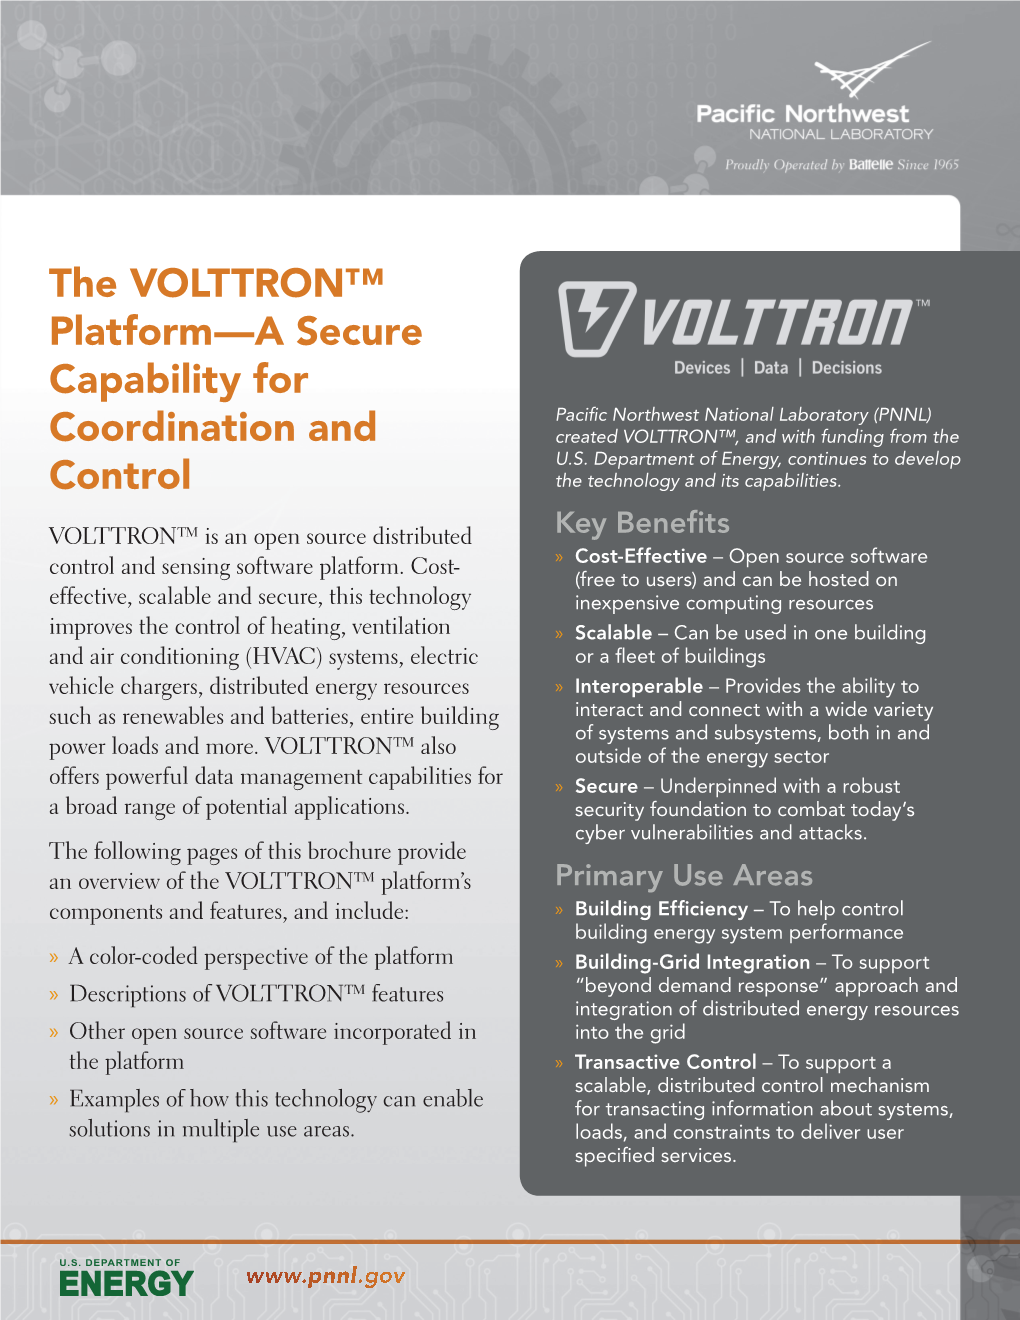 The VOLTTRON™ Platform—A Secure Capability for Coordination